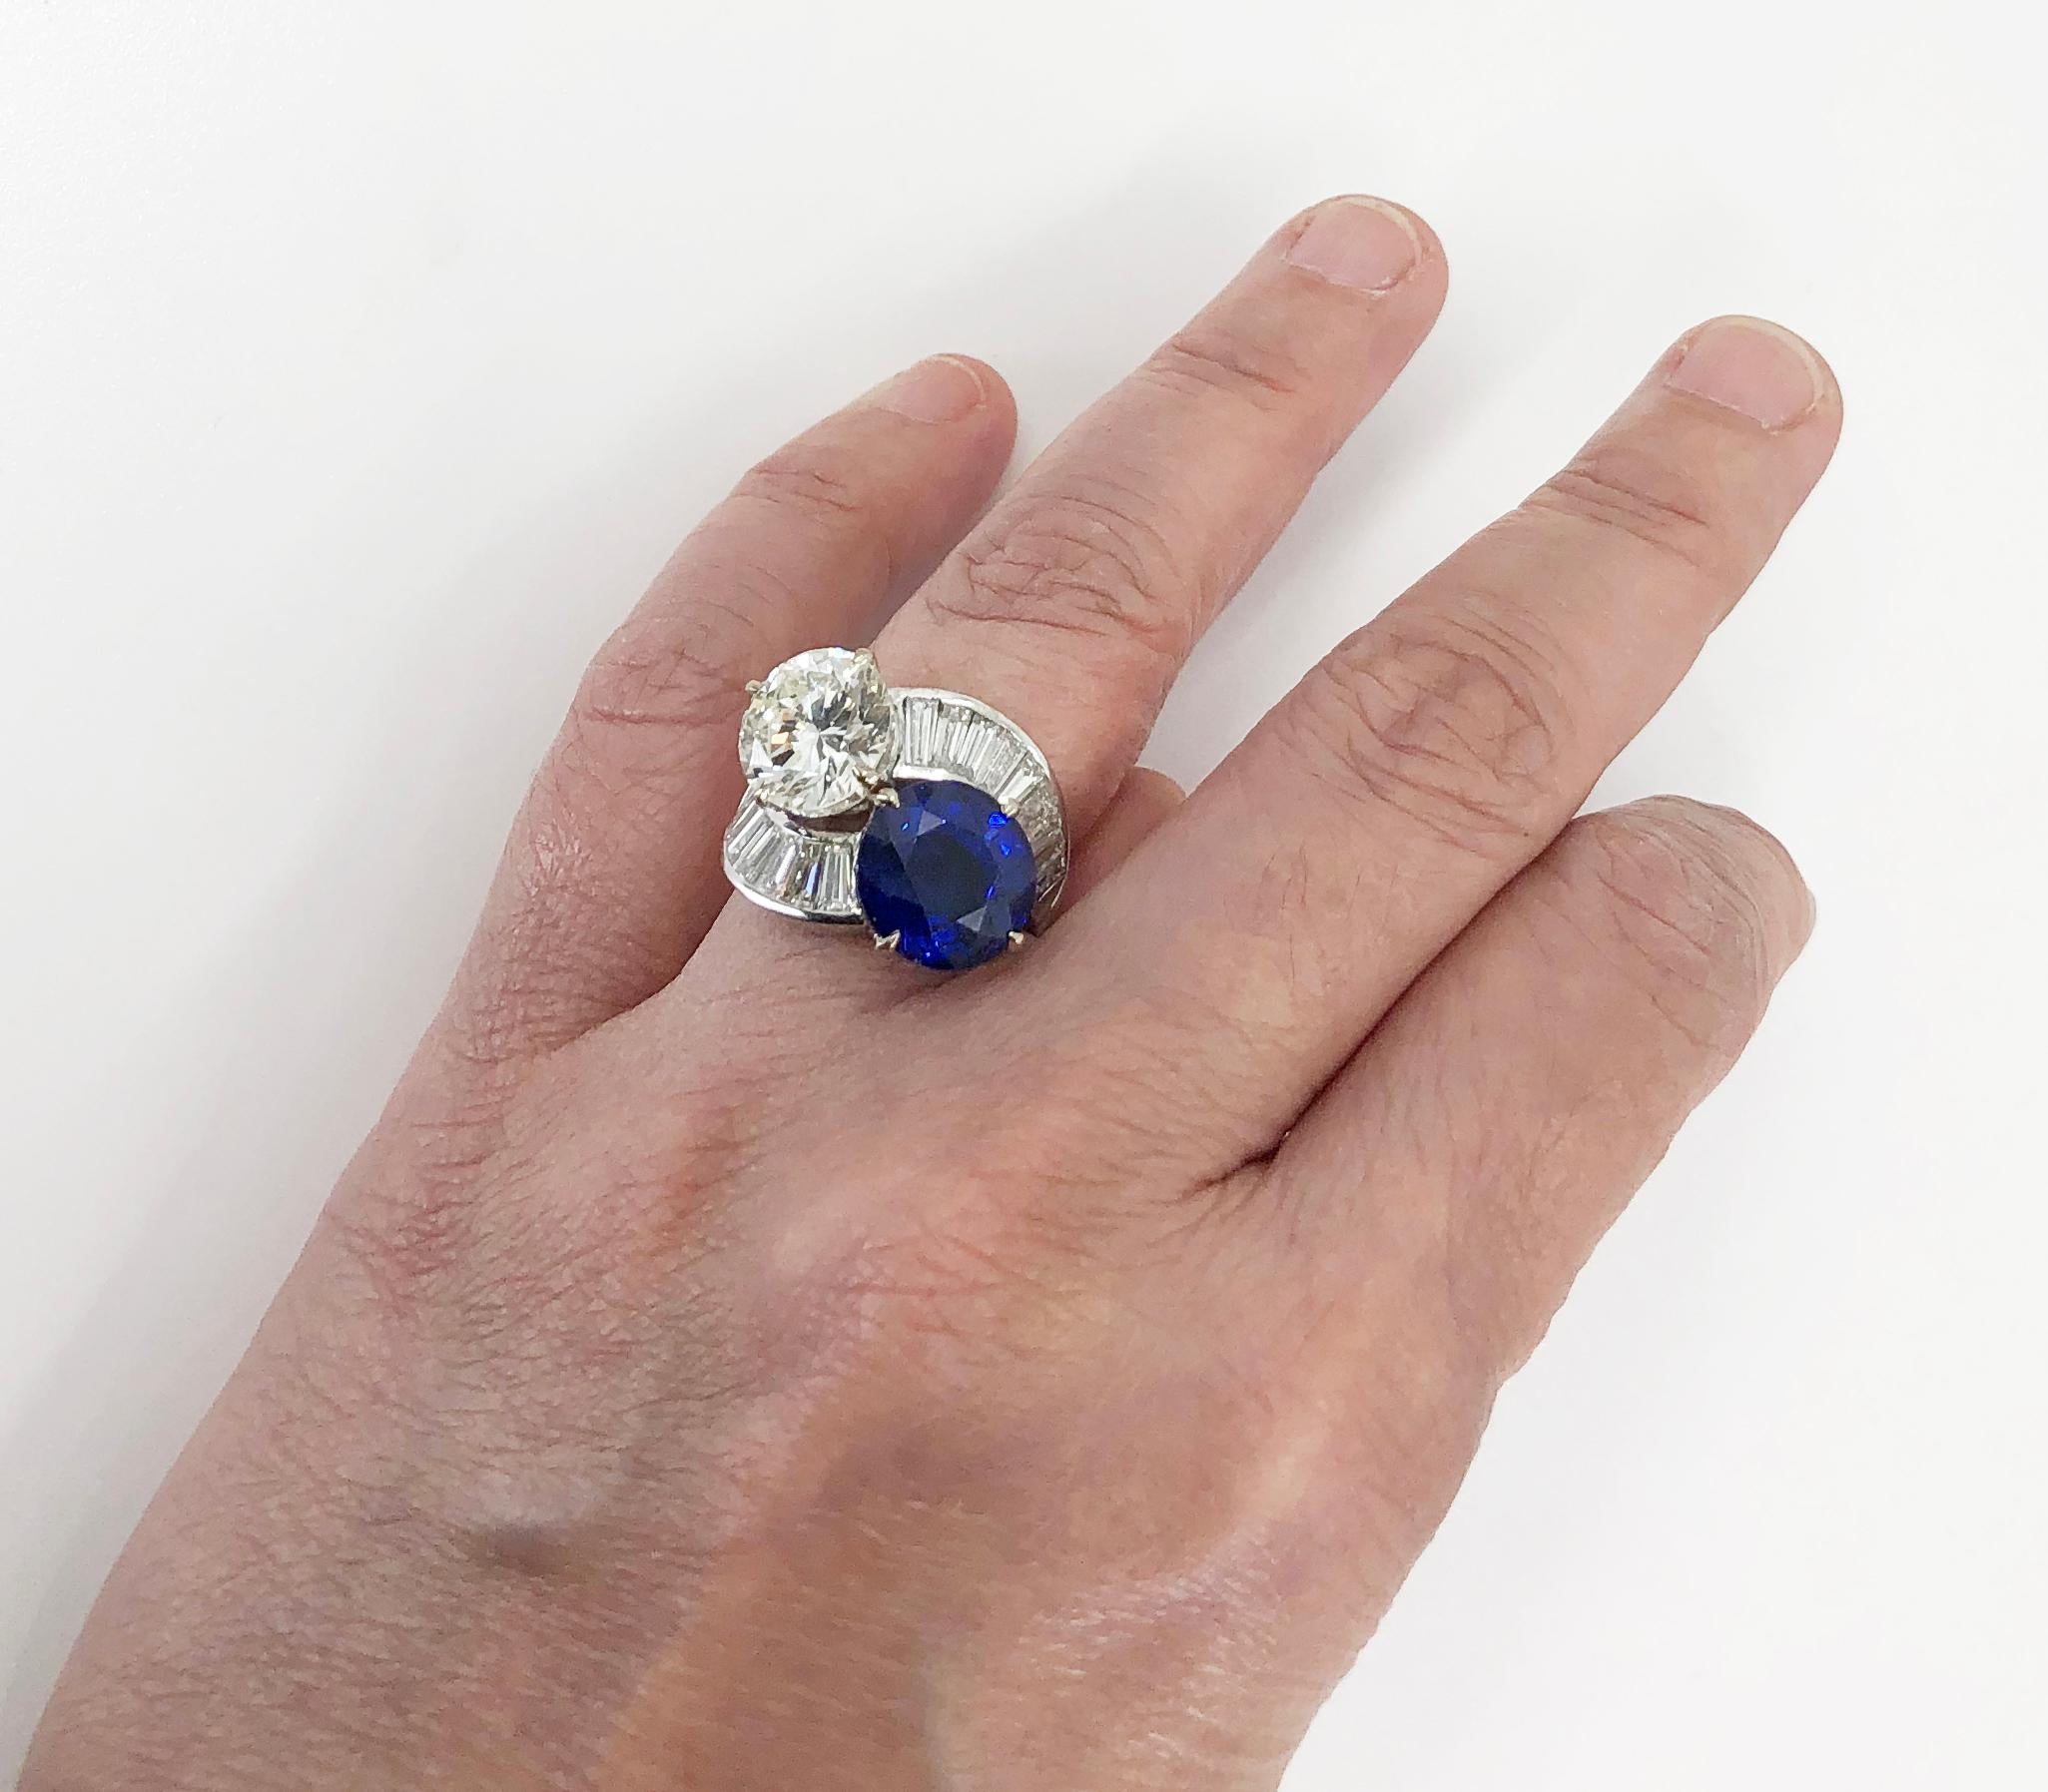 An iconic ‘Toi et Moi’ ring, crafted in 18k white gold featuring a large round cut diamond and a 9 carat round cut sapphire, each held by a row of baguette cut diamonds. Sapphire – approx. 9cts. and 4cts. of diamonds.